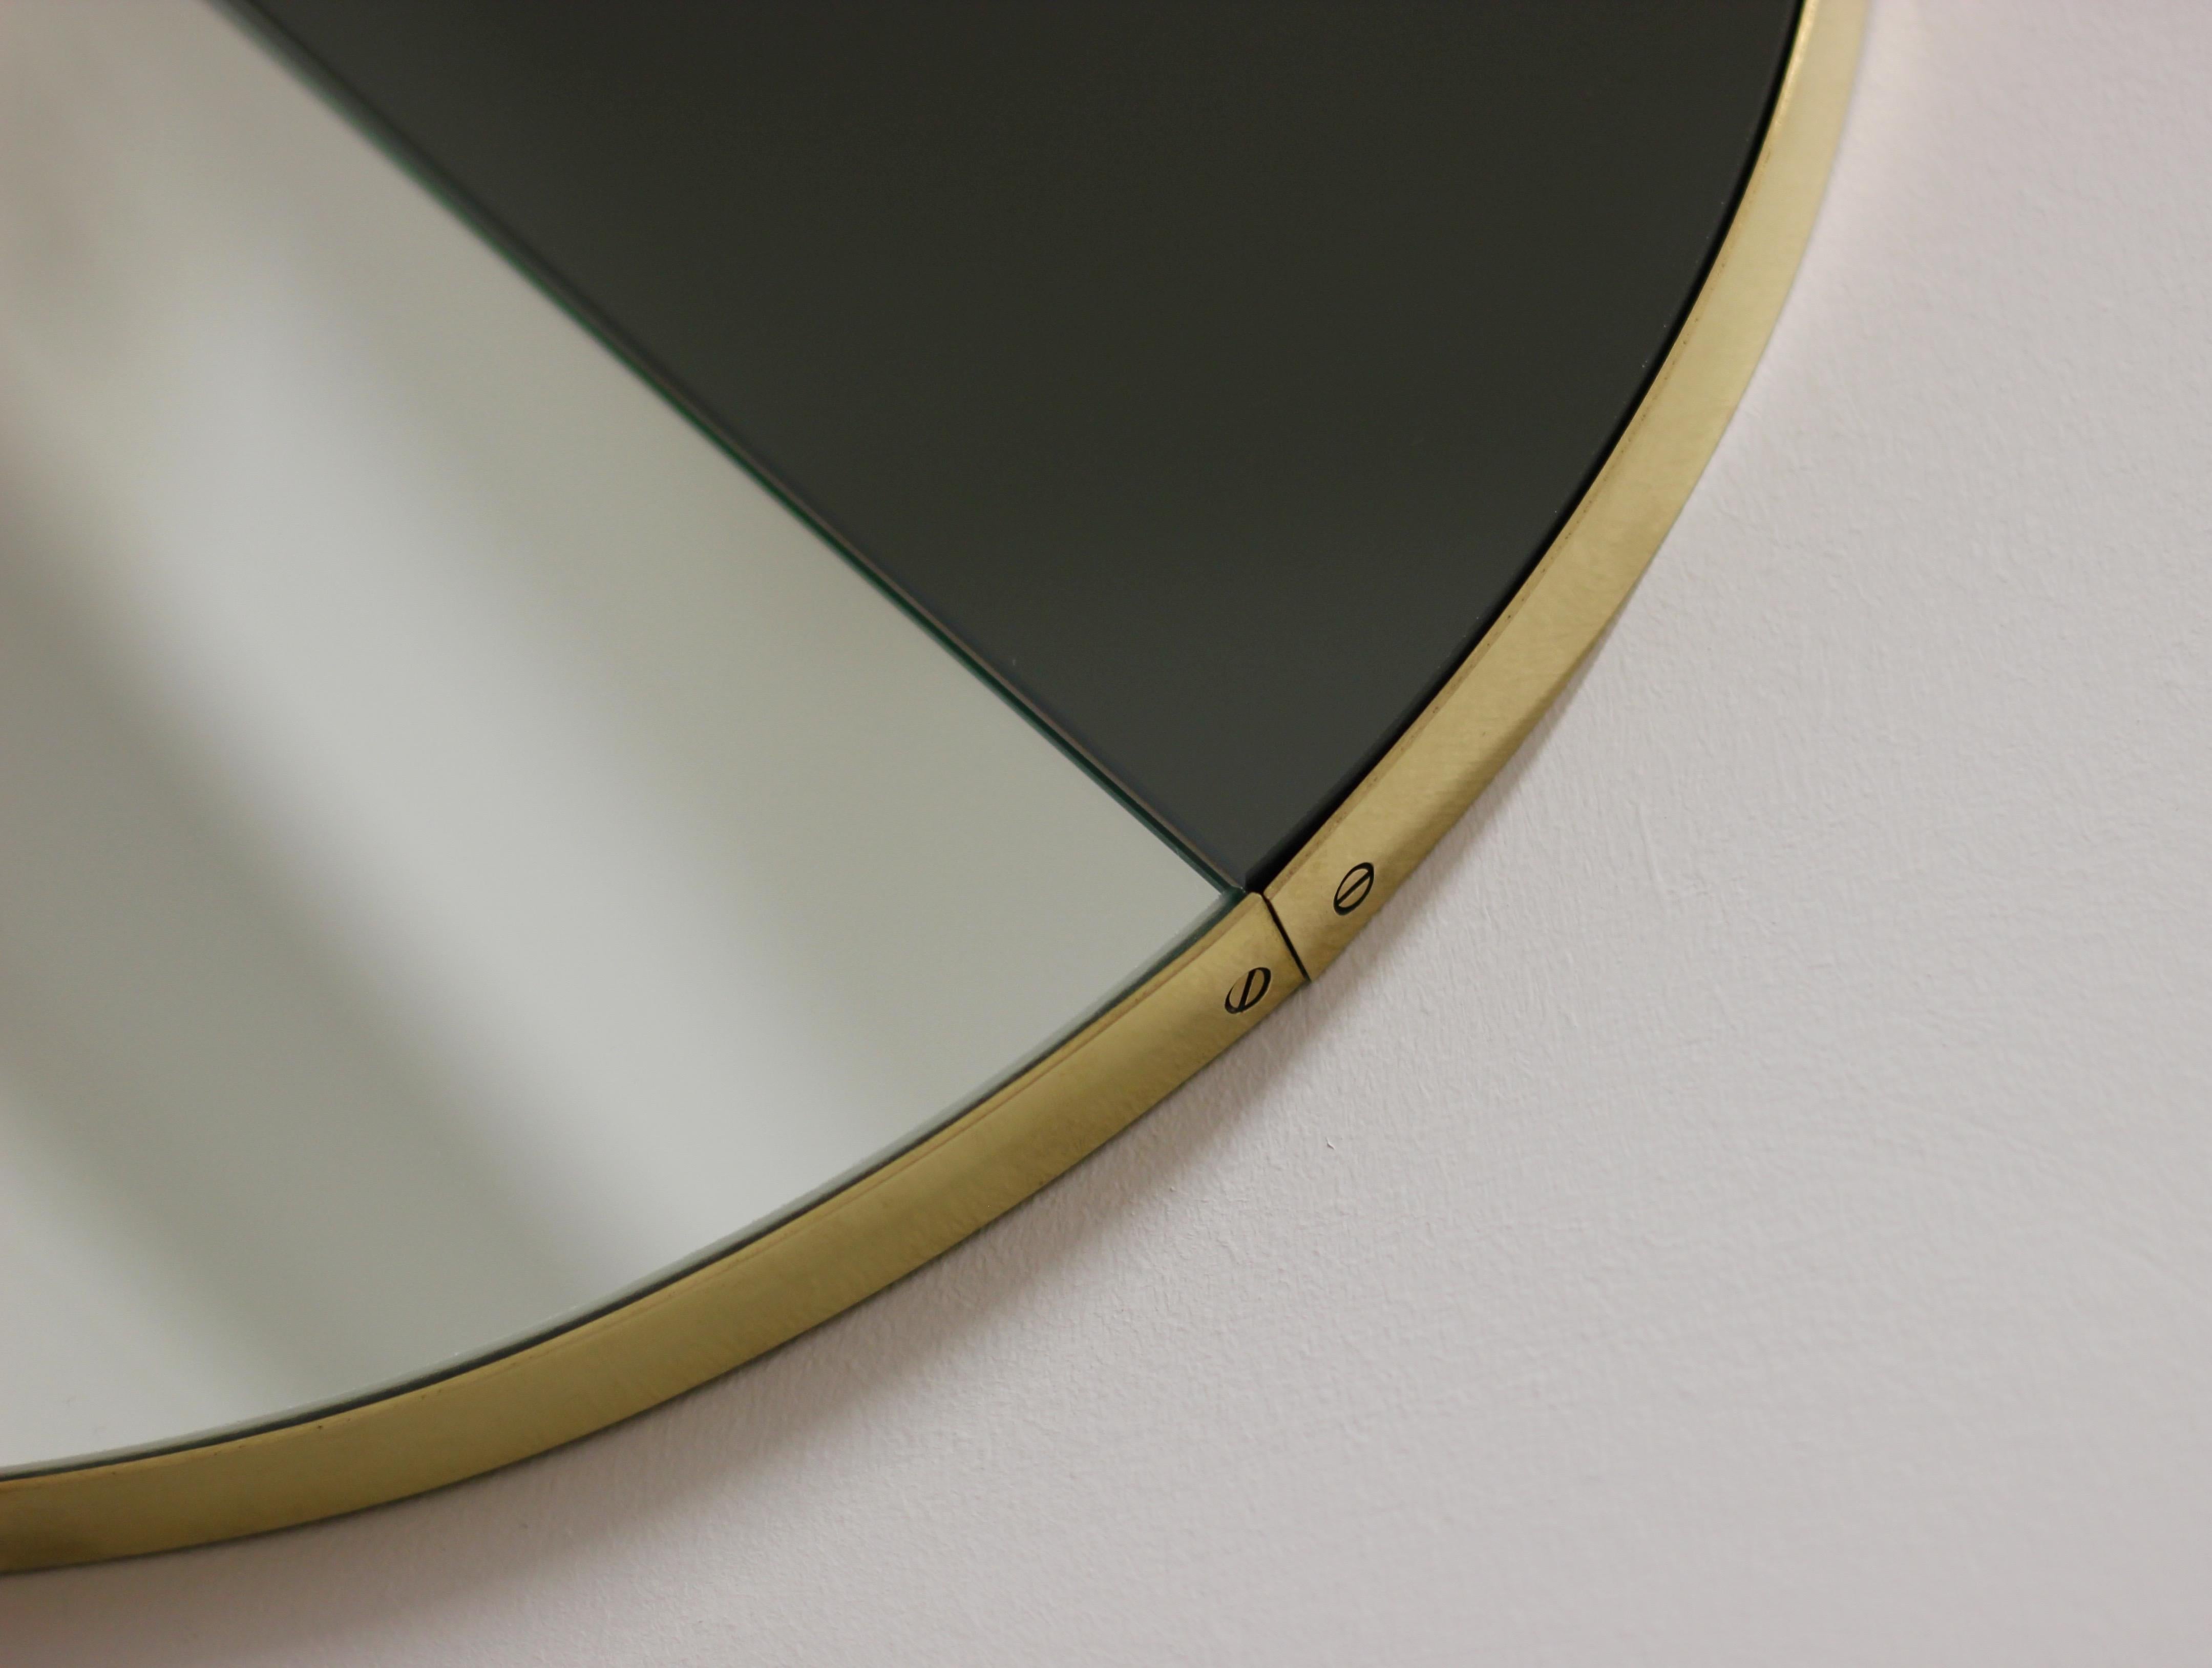 Orbis Dualis Mixed Tint Contemporary Round Mirror with Brass Frame, Regular For Sale 2